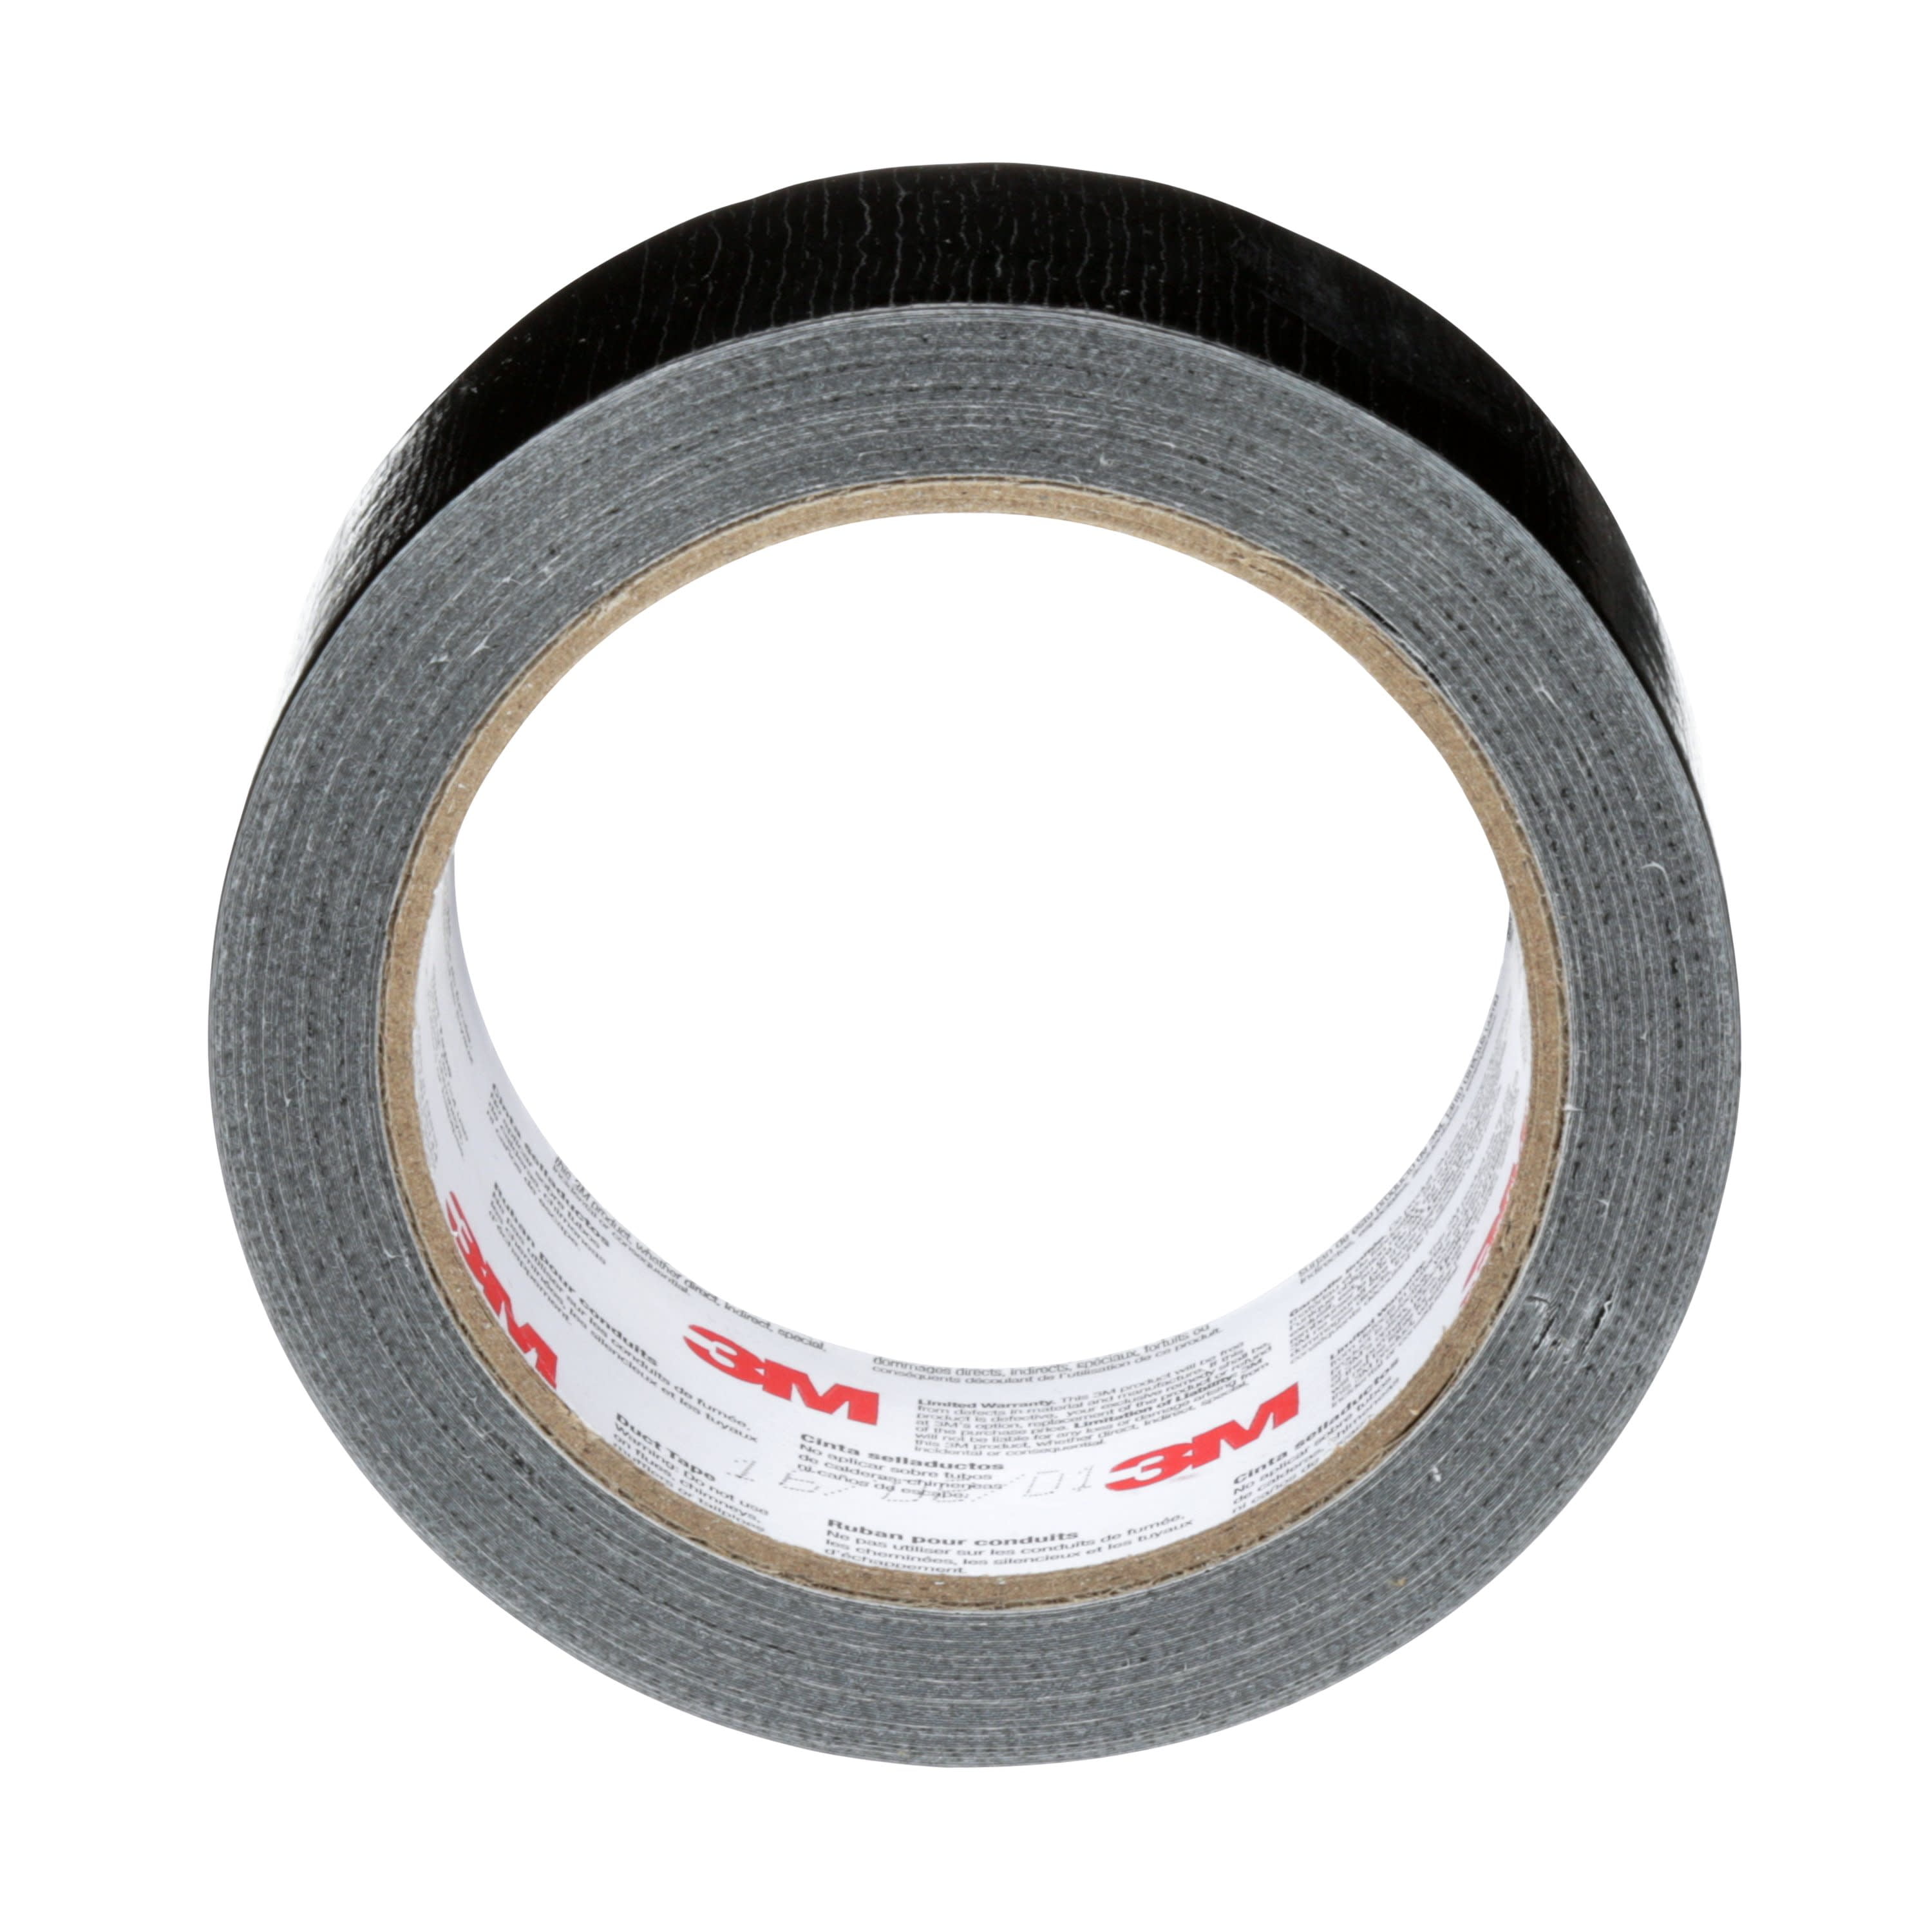 3M 1.88 In. x 55 Yd. Colored Duct Tape, White - Town Hardware